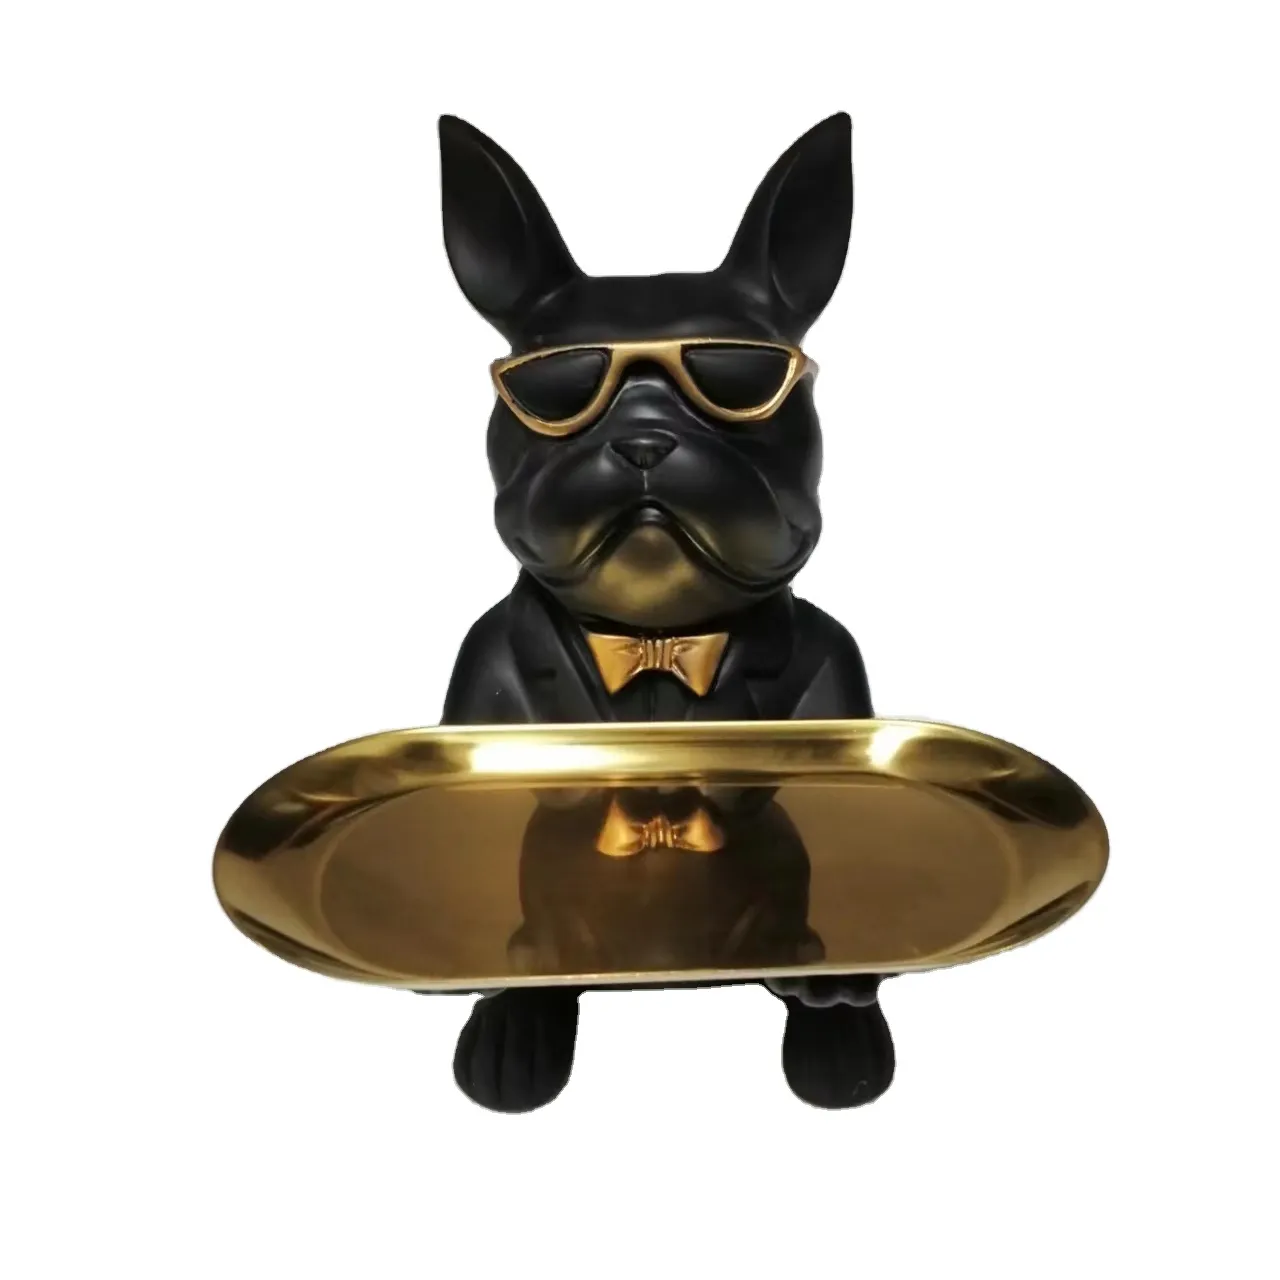 HOT SELLING ARTIFICIAL CREATIVE POLYRESIN CUTE ANIMAL BULLDOG HOLDING CANDY KEYT METAL PLATE HOUSE DECORATIVE STATUE GIFT TOY